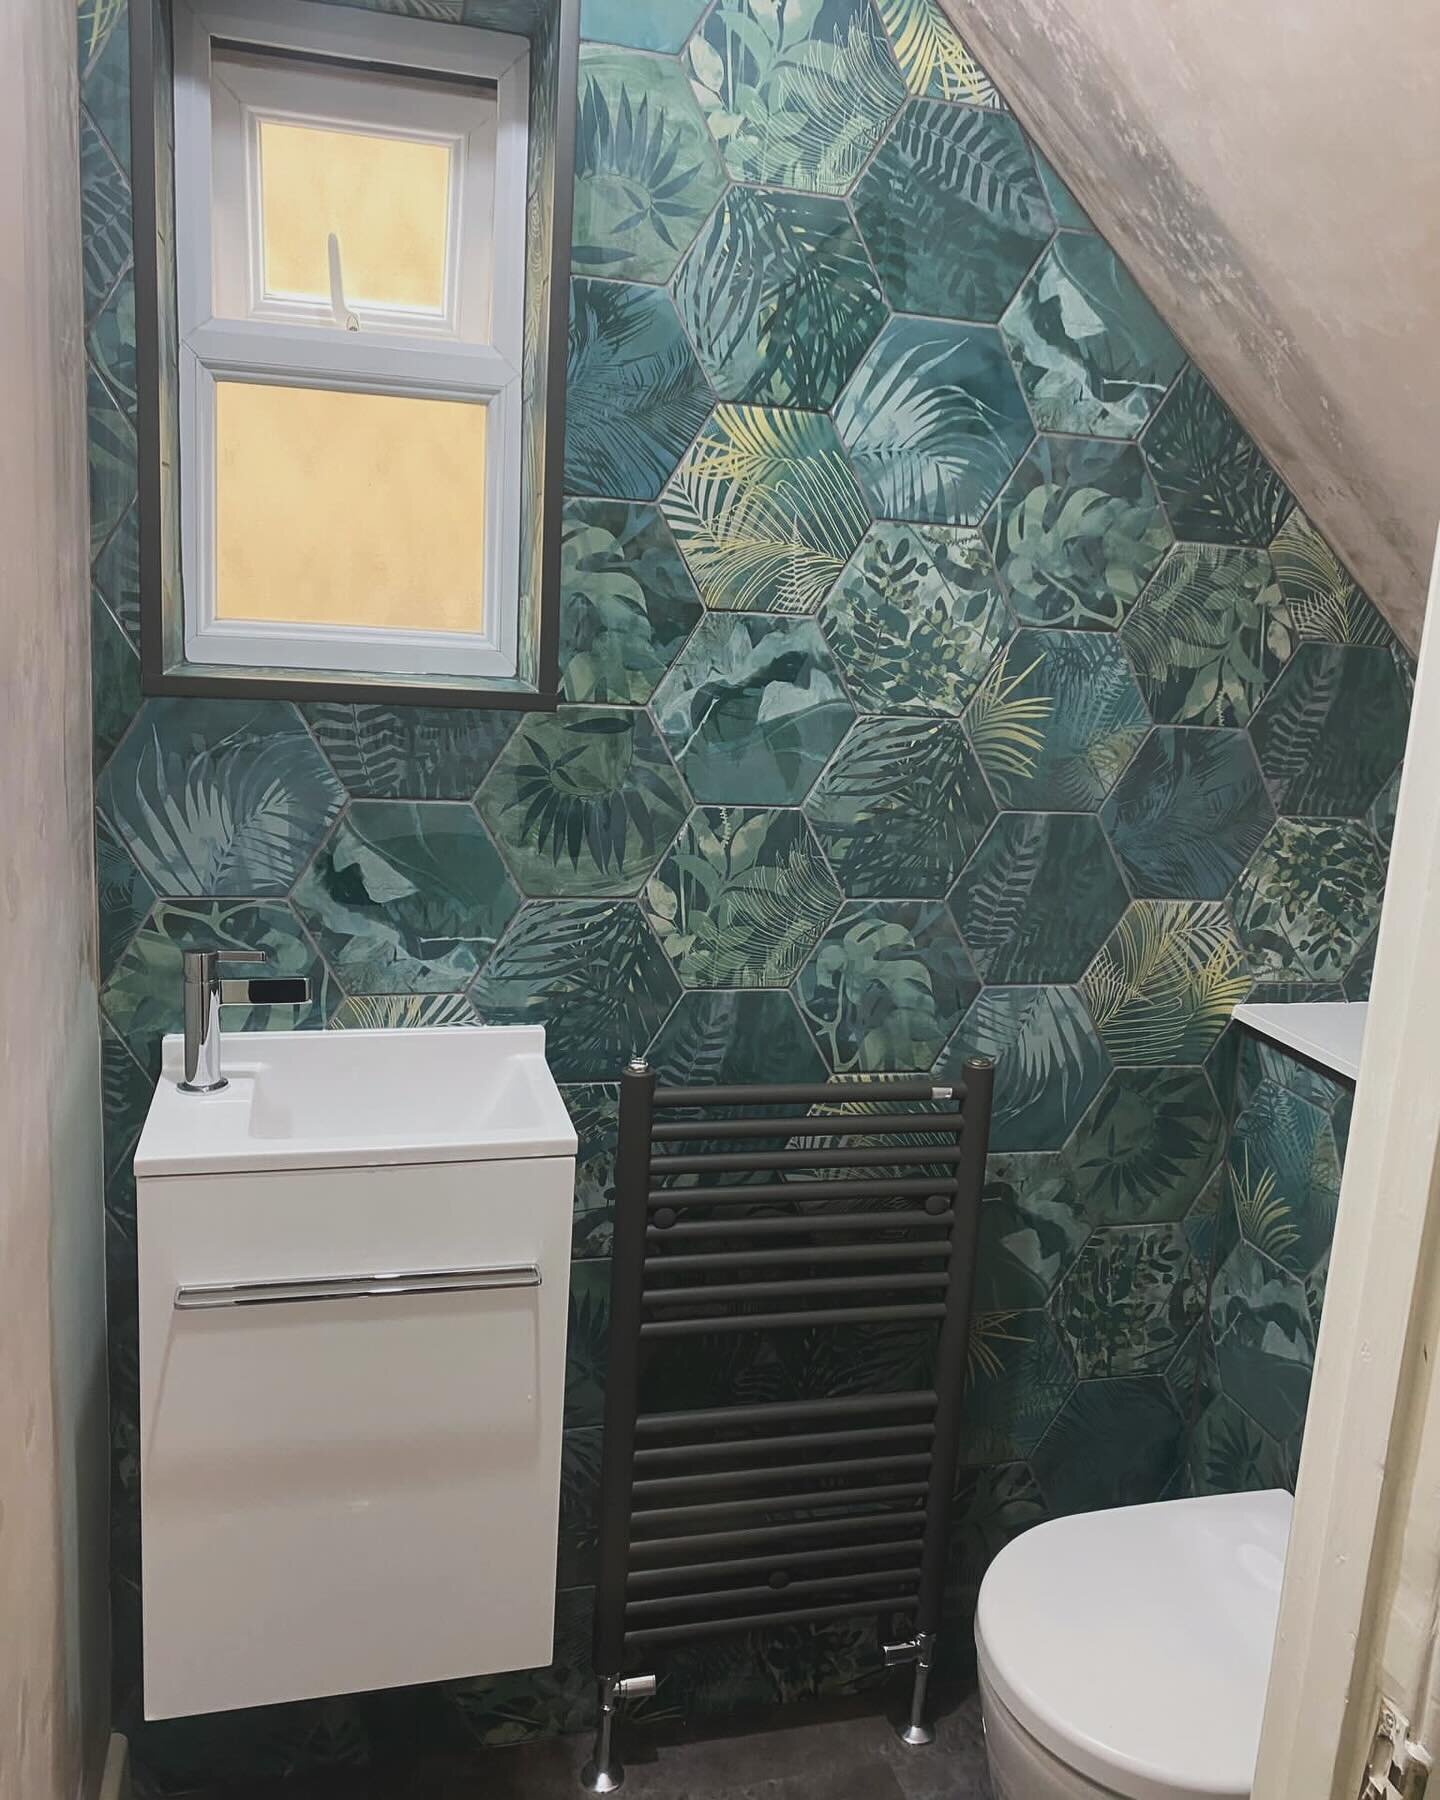 We just love these Jungle tiles by @capietra - this cloakroom under the stairs has now come to life boasting clean lines and design flair. Designed . Supplied. Installed by Dajon Interiors #cloakroomdesign #cloakroom